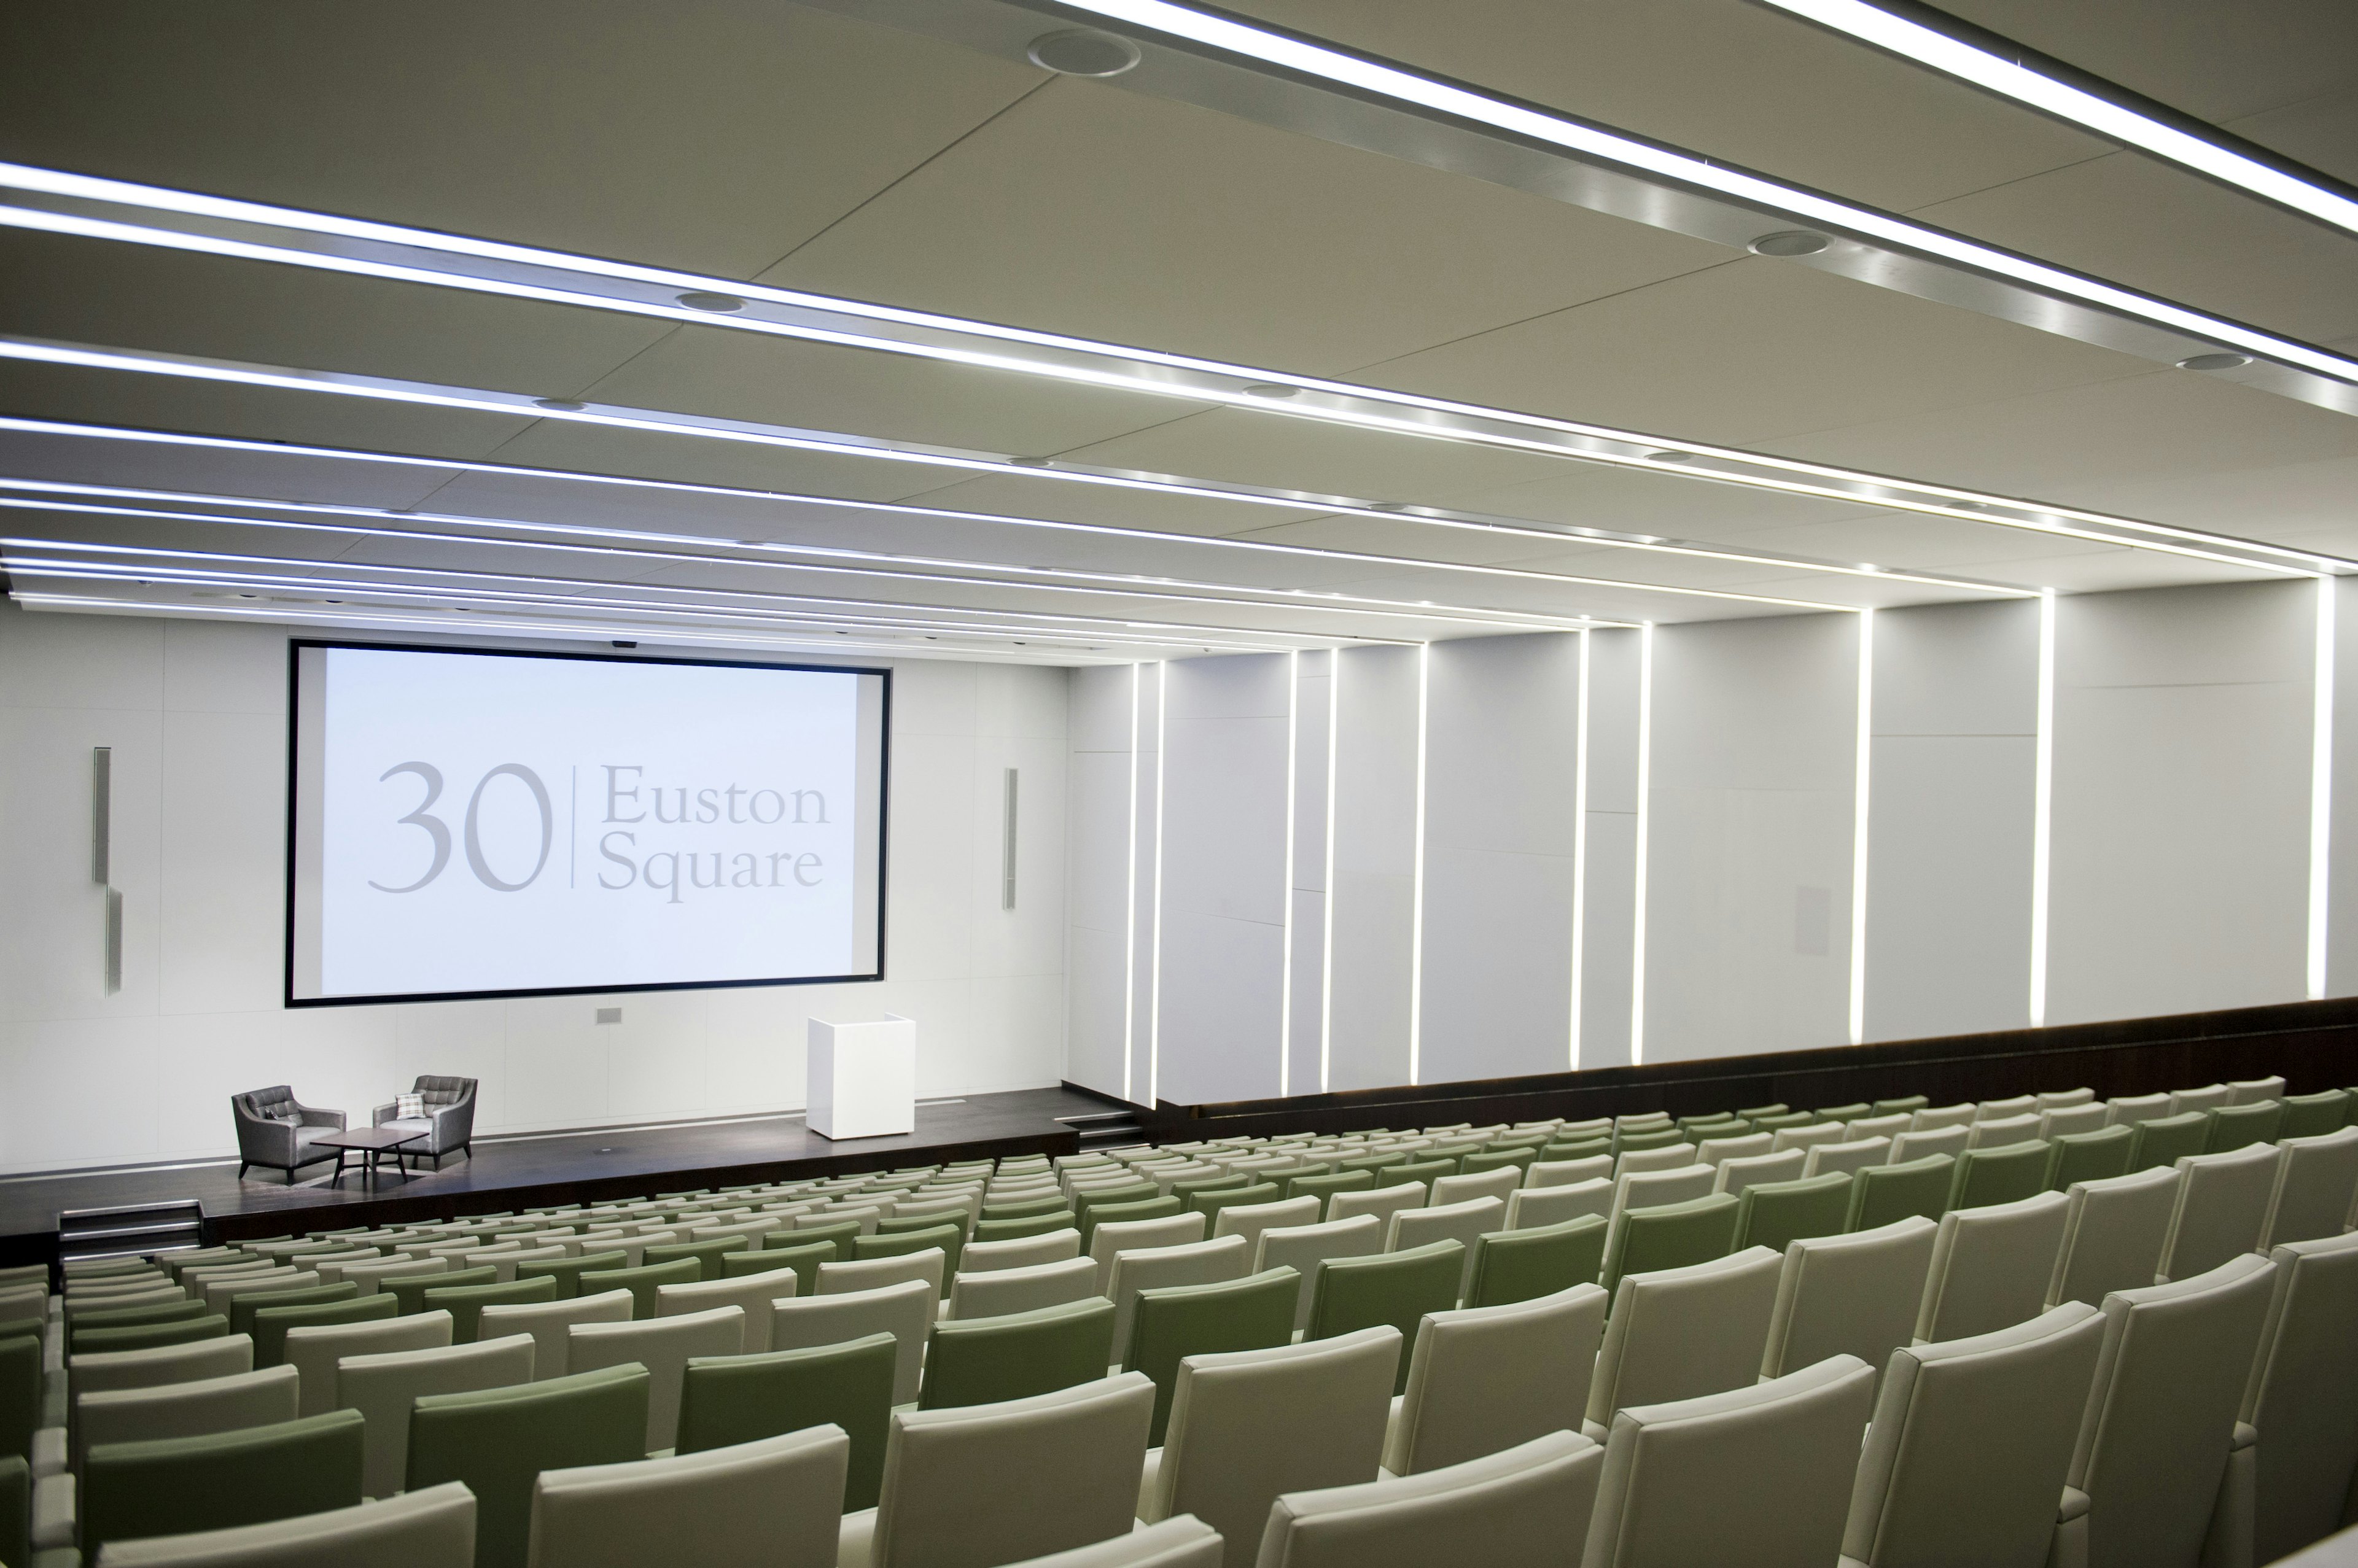 Conference Venues - 30 Euston Square - Business in Auditorium and Exhibition Space - Banner